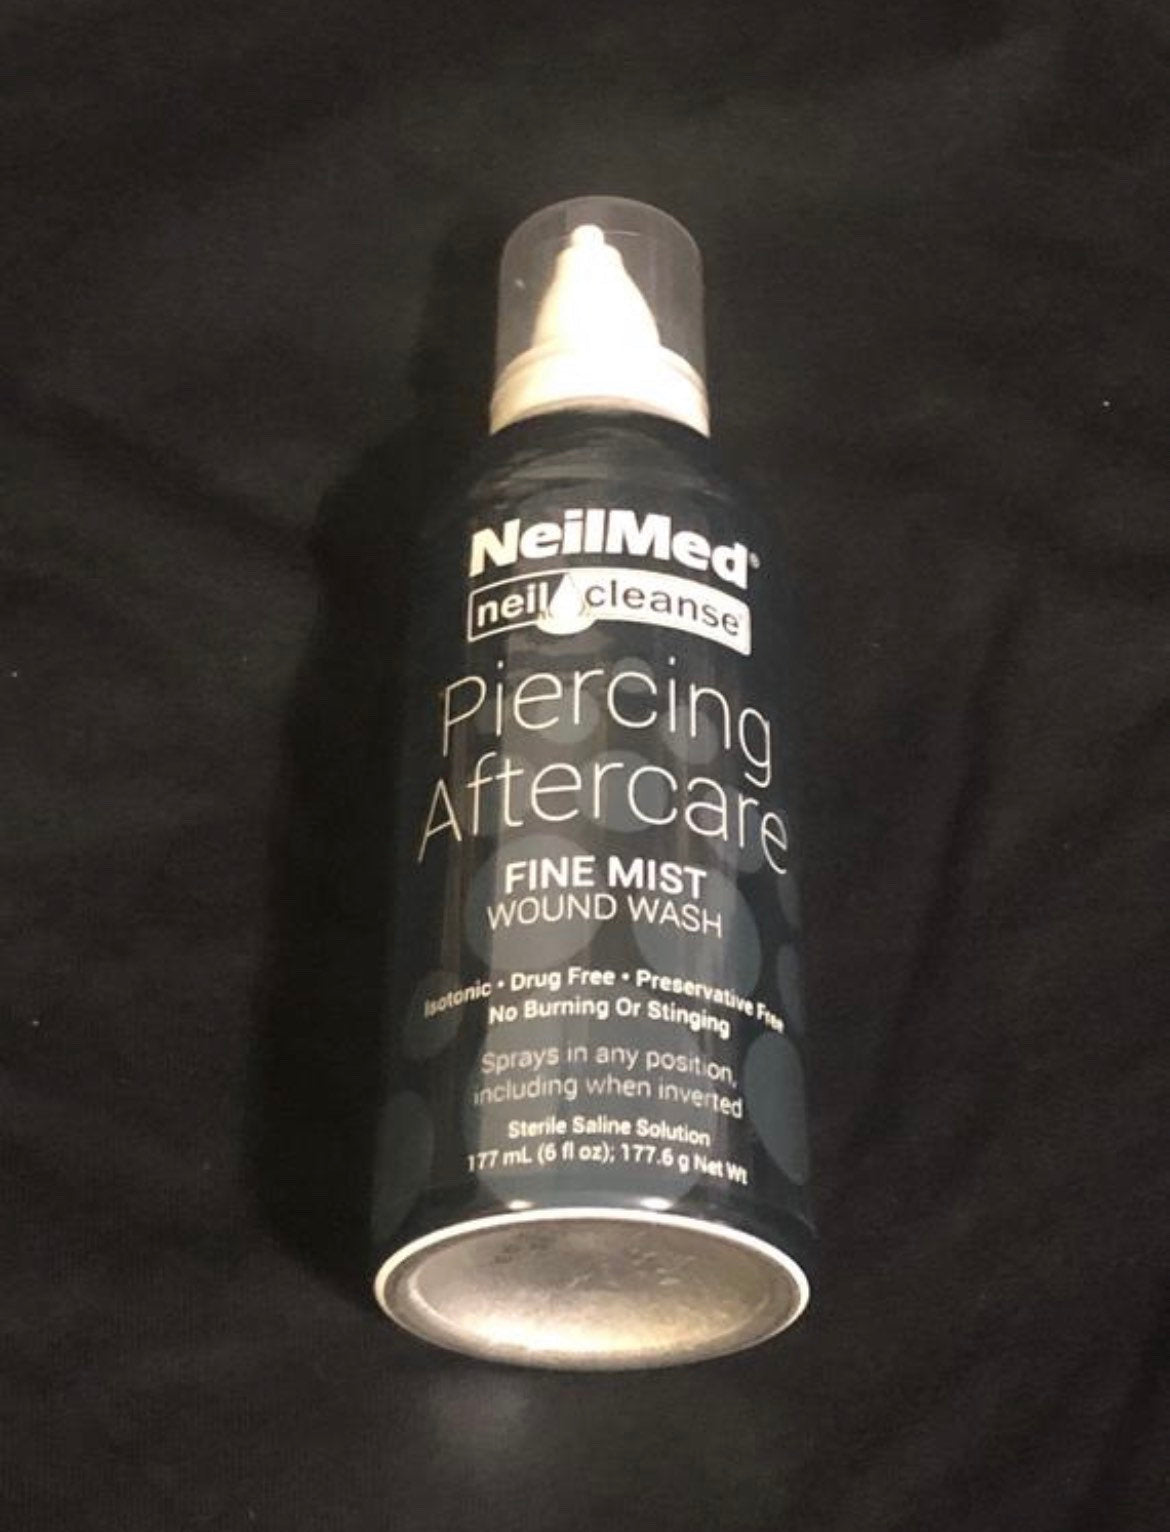 3 cans of Neilmed wound wash